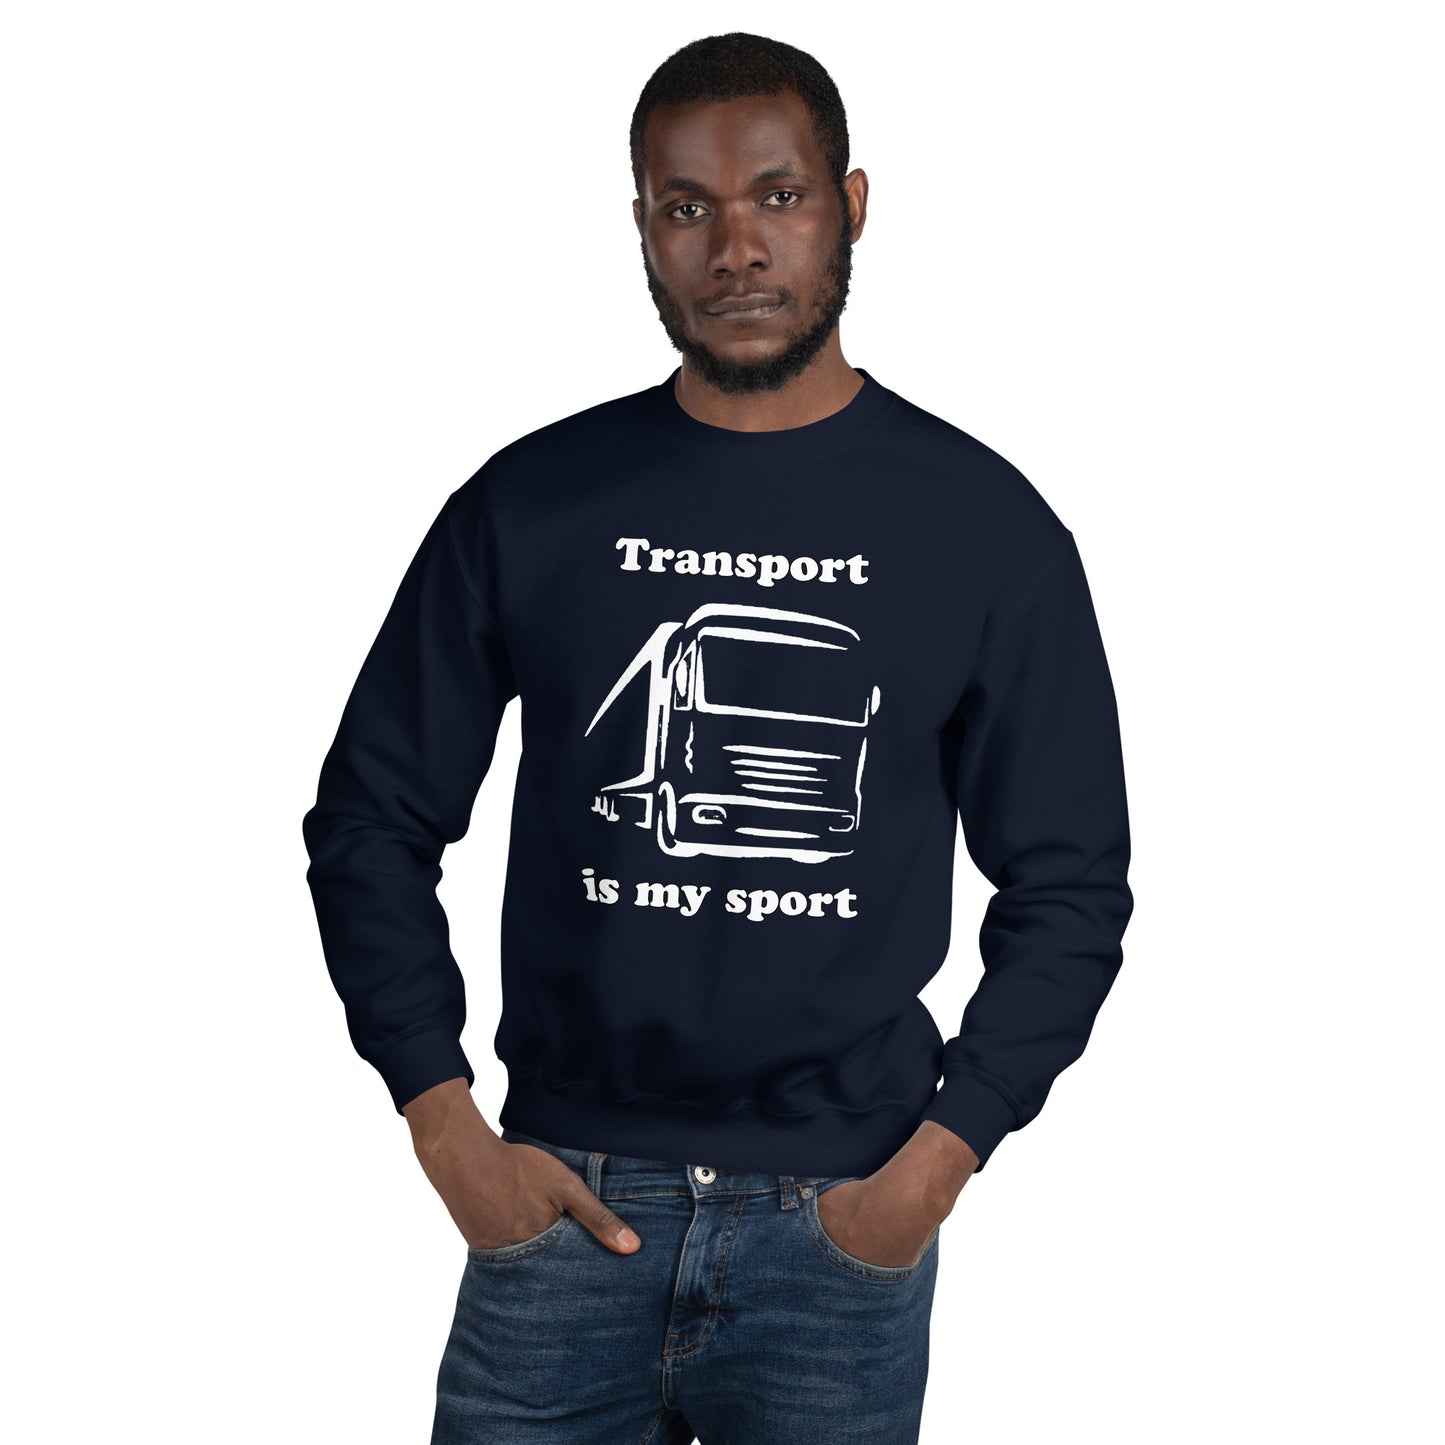 Man with navy blue sweatshirt with picture of truck and text "Transport is my sport"